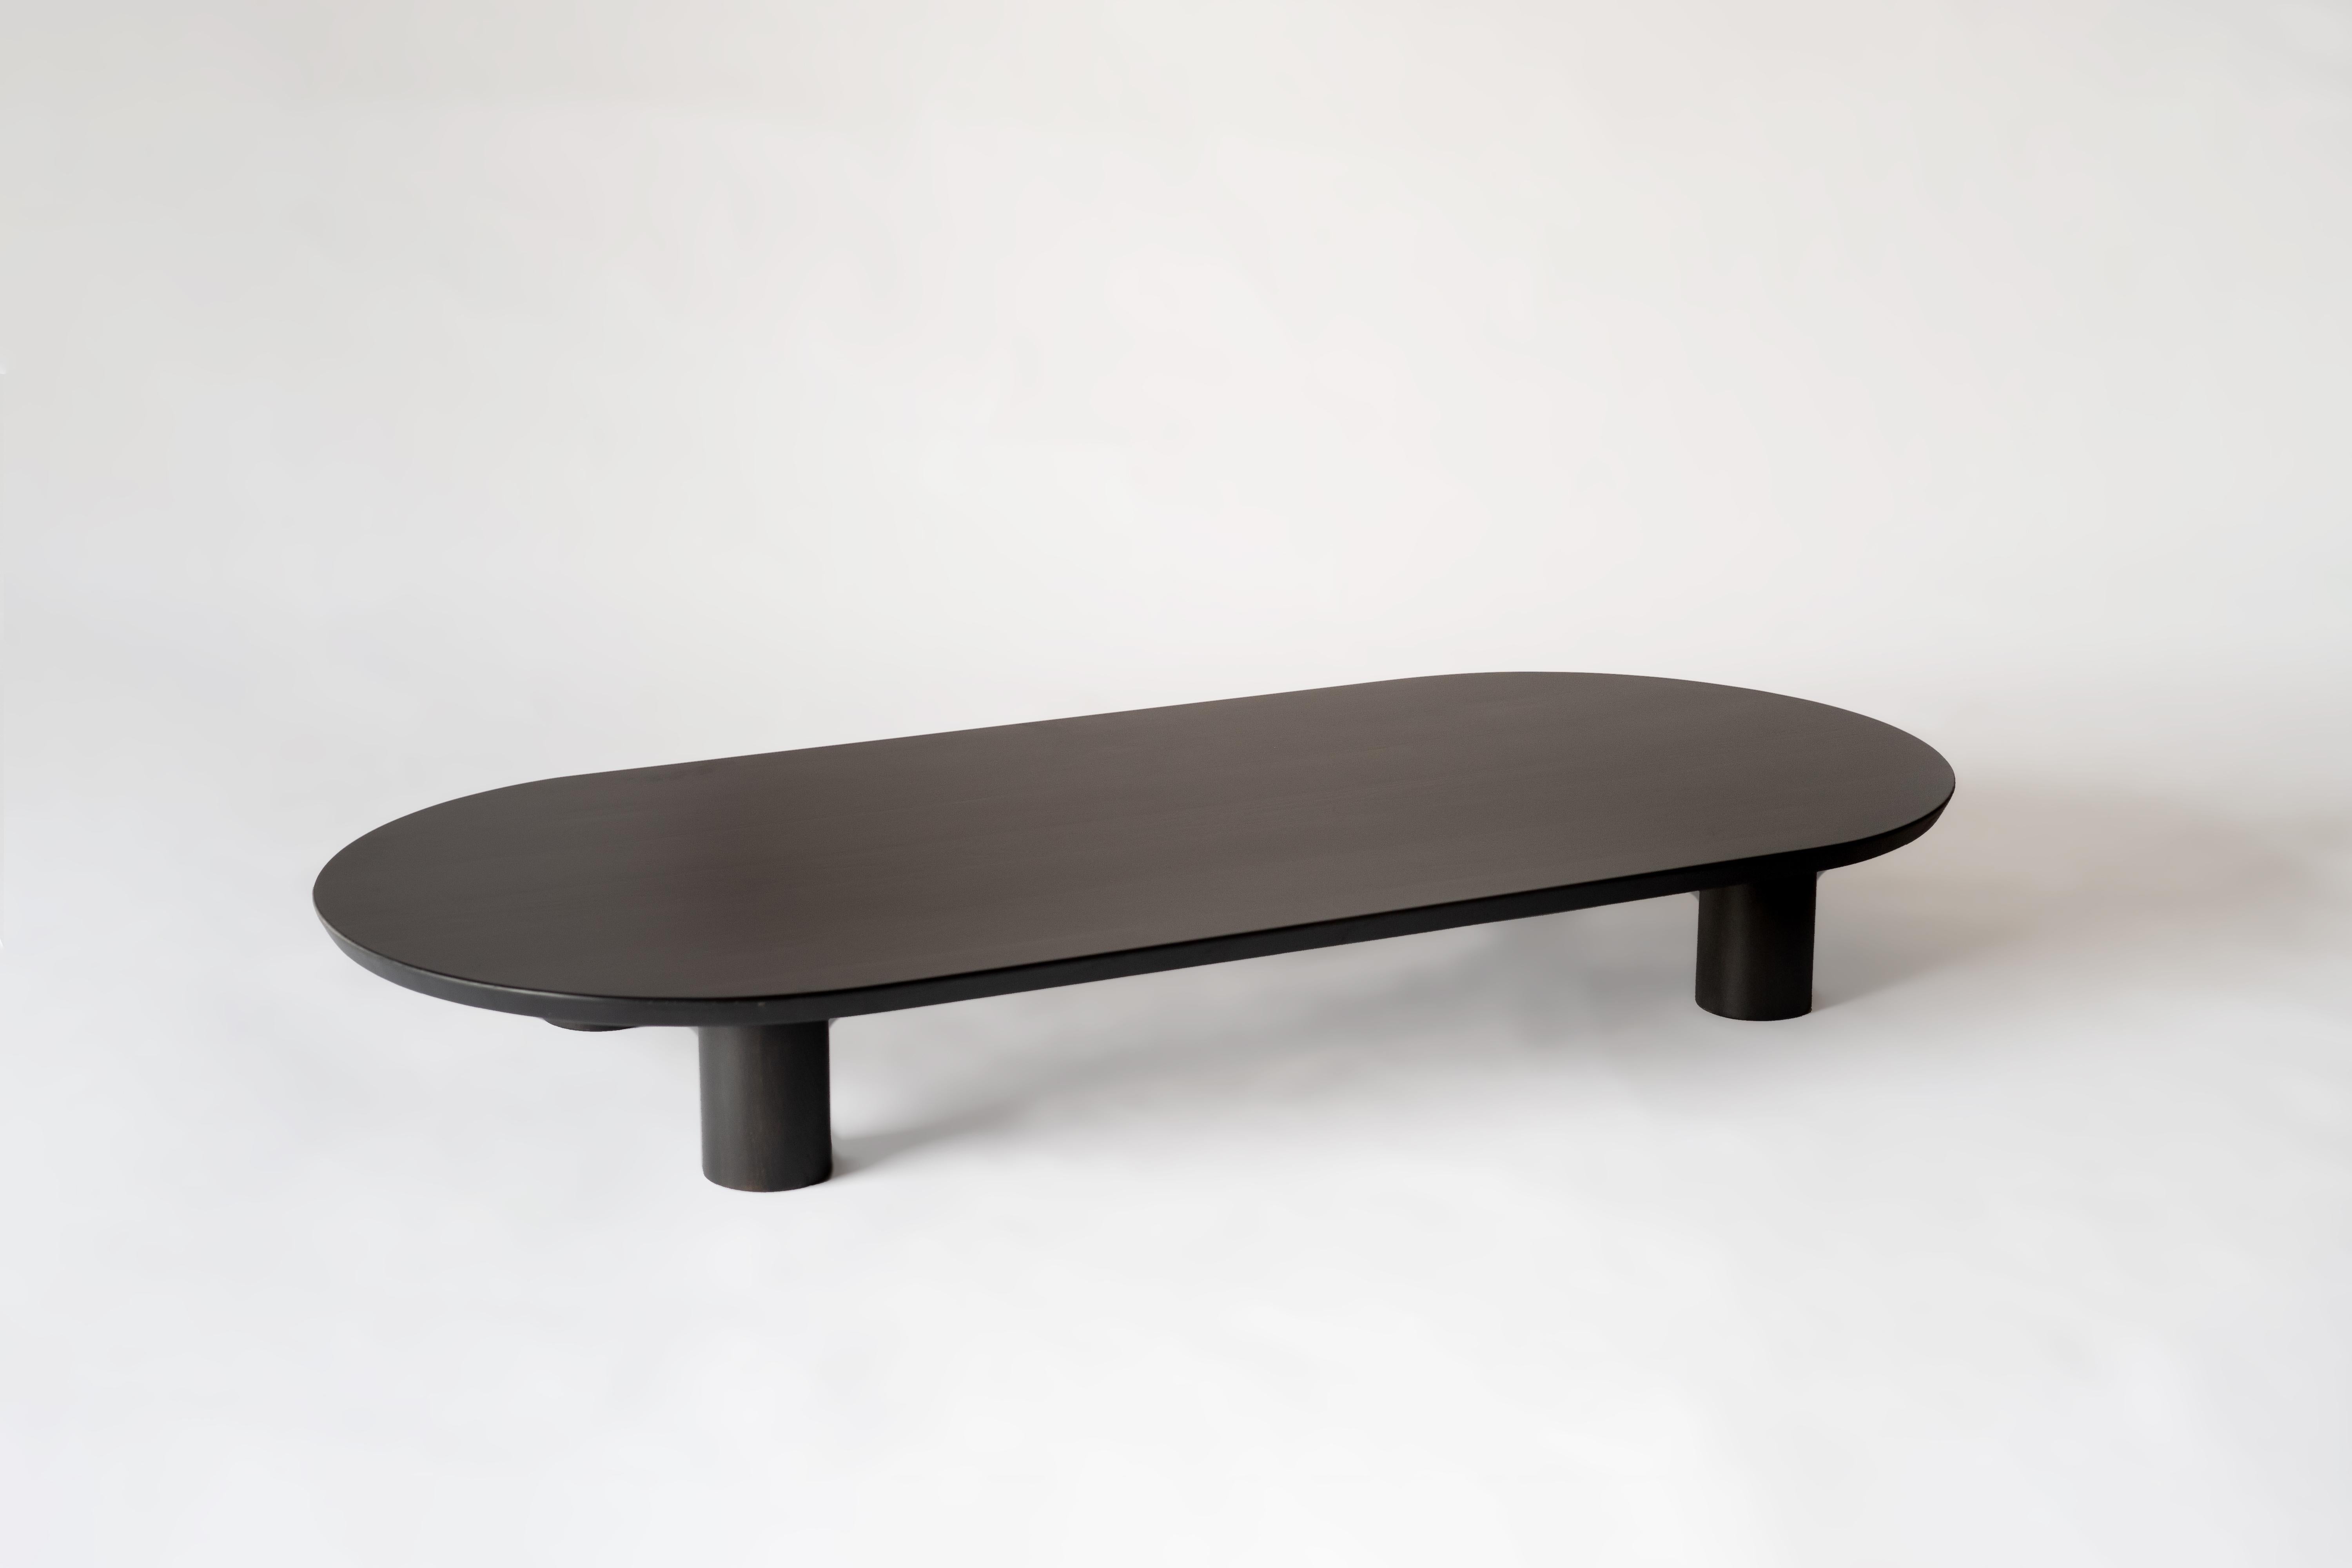 Sun at Six is a contemporary furniture design studio that works with traditional Chinese joinery masters to handcraft our pieces using traditional joinery. Our Classic coffee table simple, versatile and functional. Tenna oil is hand rubbed.

Great